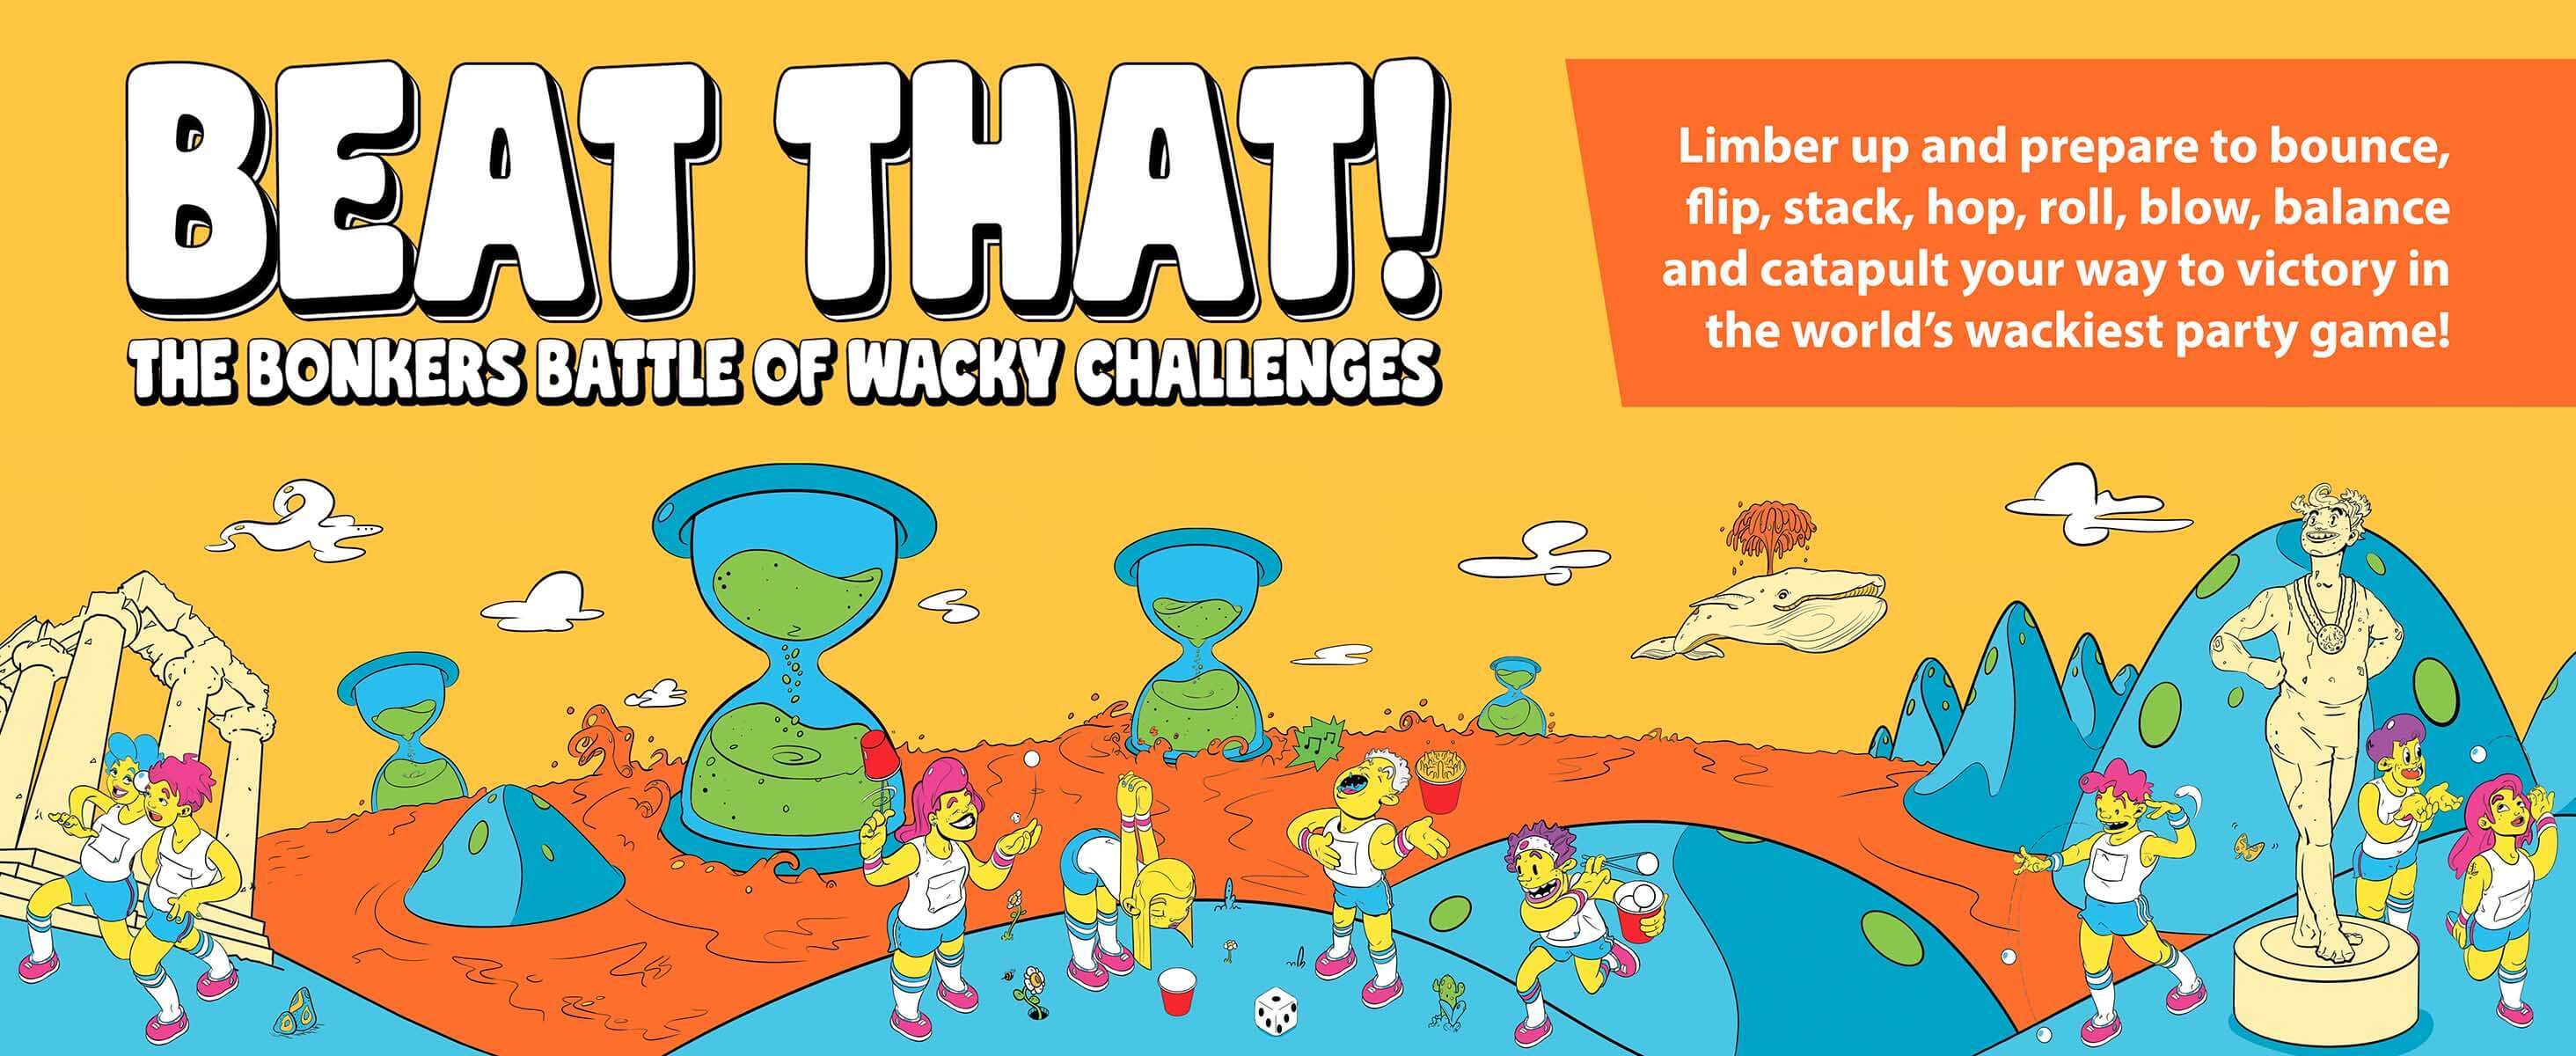 Beat That! Family Party Game for Kids The Bonkers Battle of Wacky Challenges 